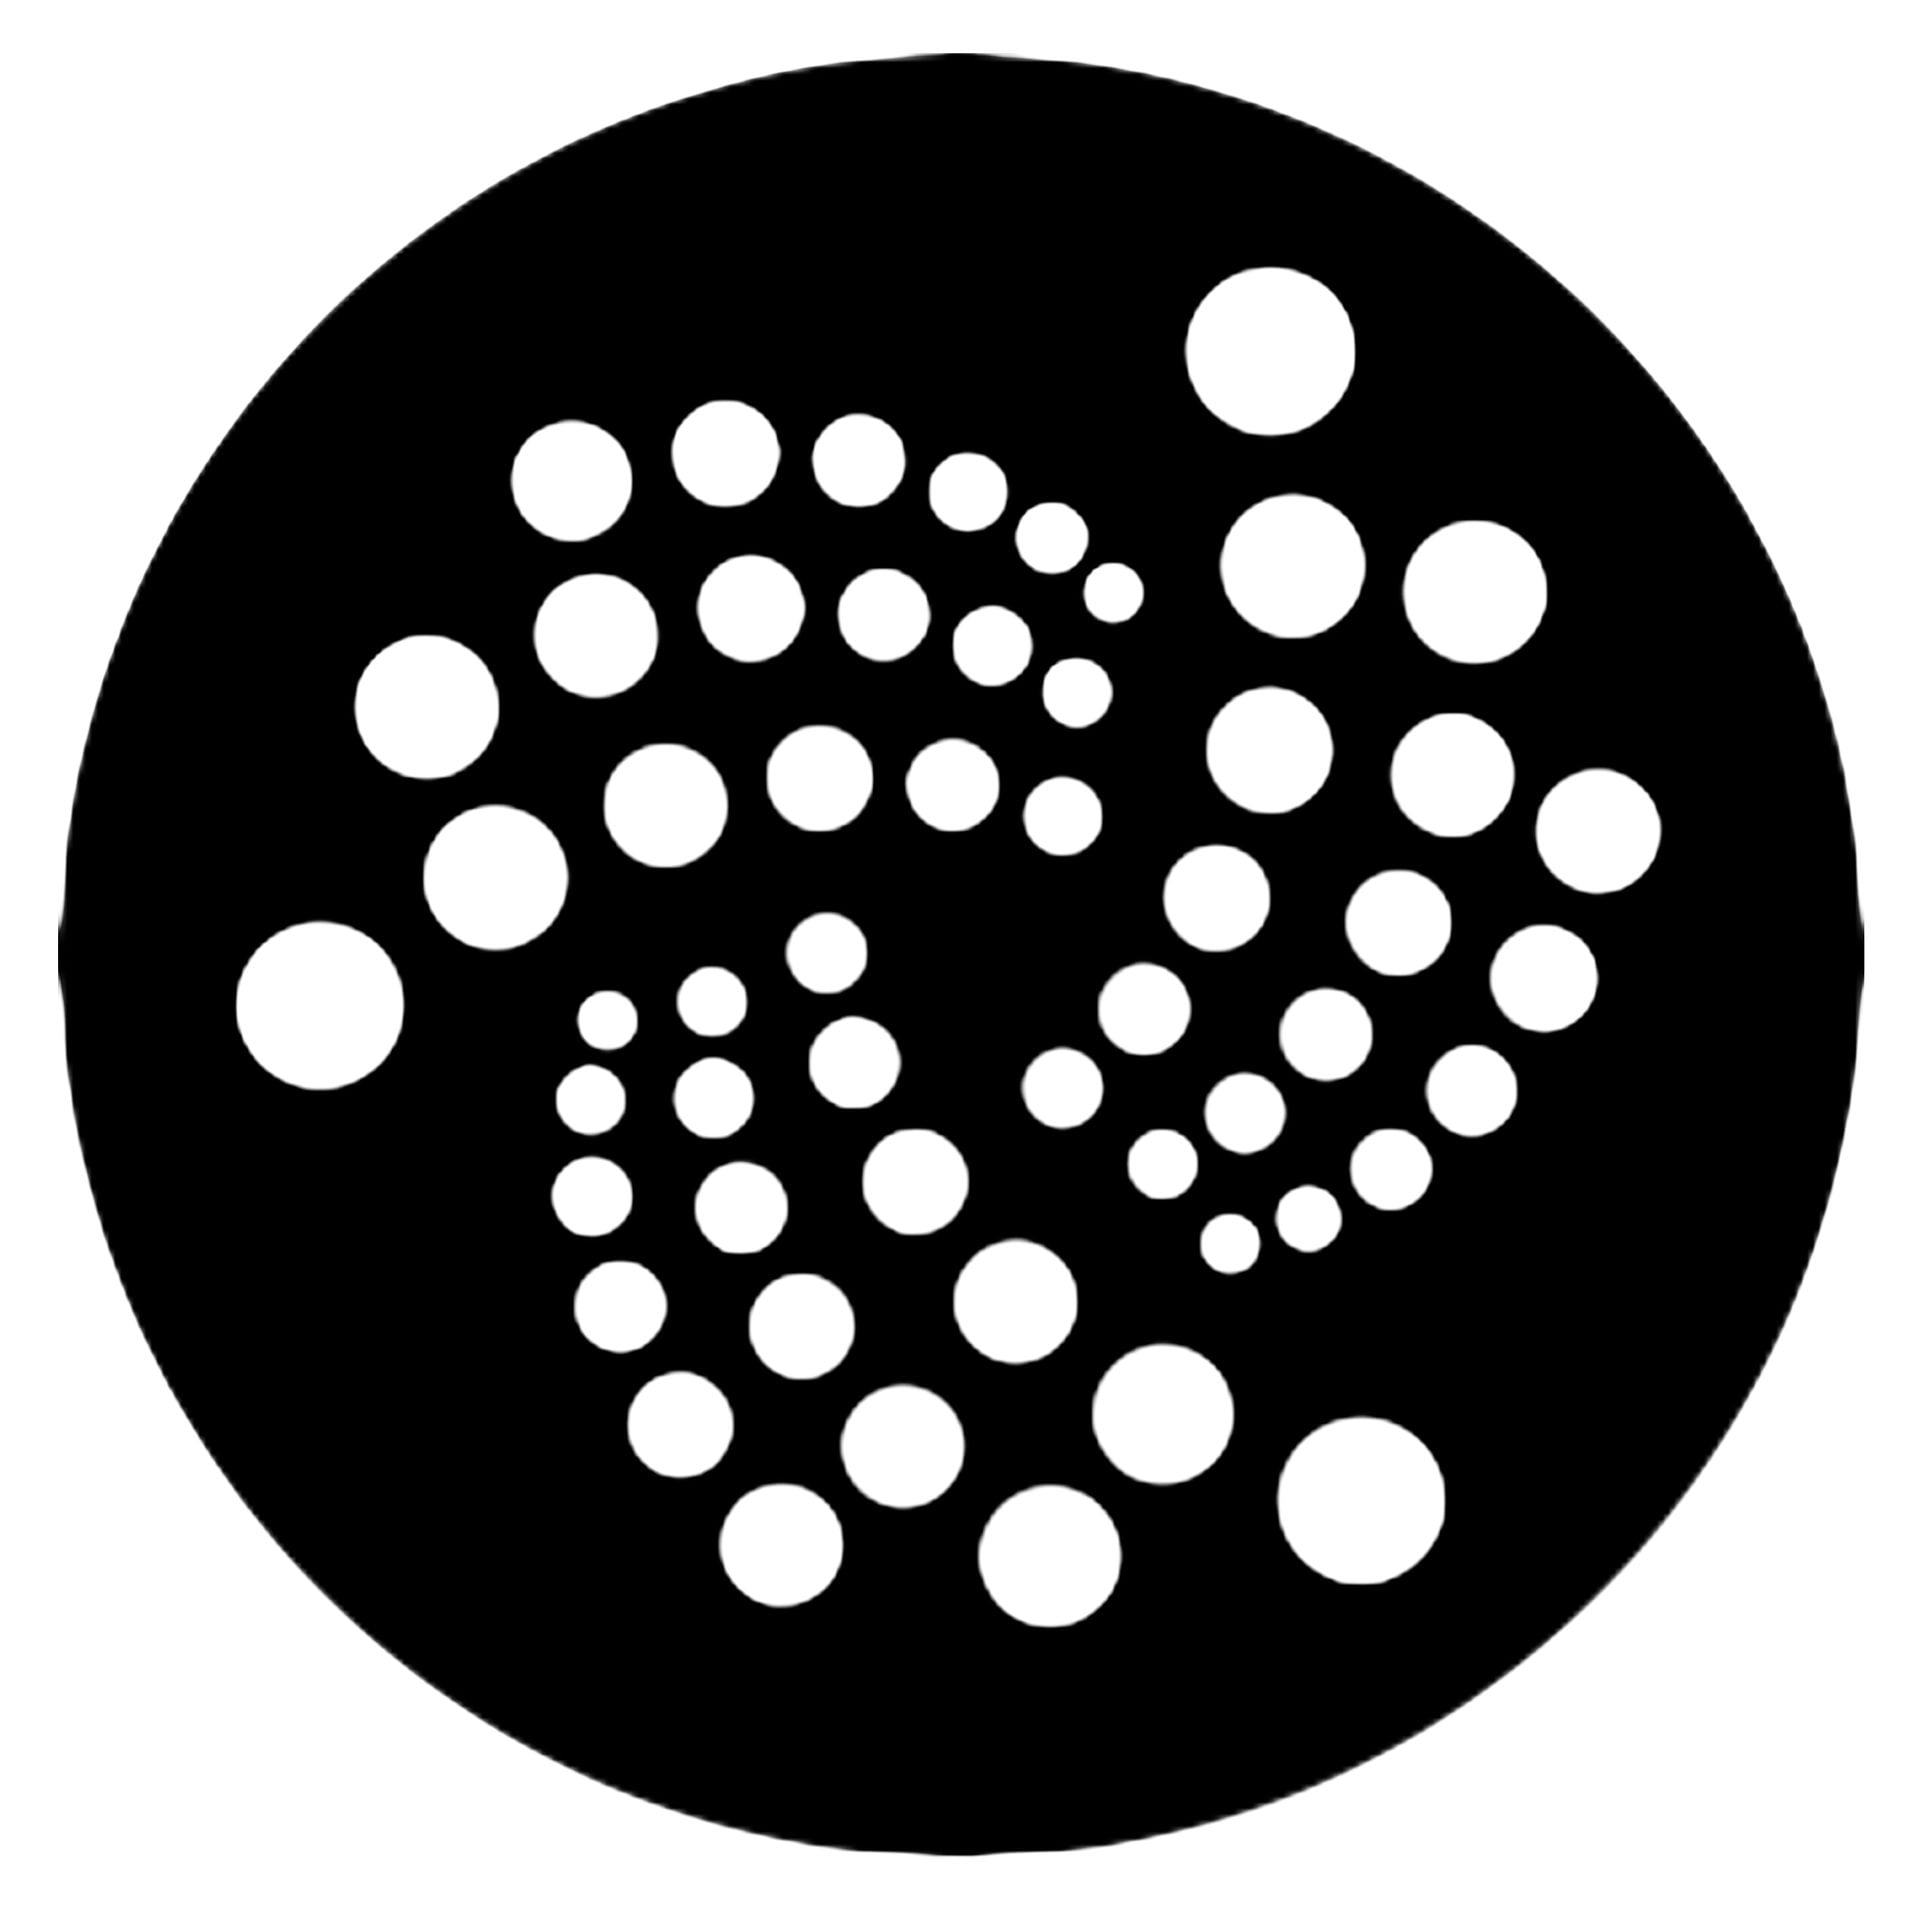 IOTA’s ShimmerEVM Unlocks a New Era: Smart Contracts for All to Conquer Billion-Dollar Market